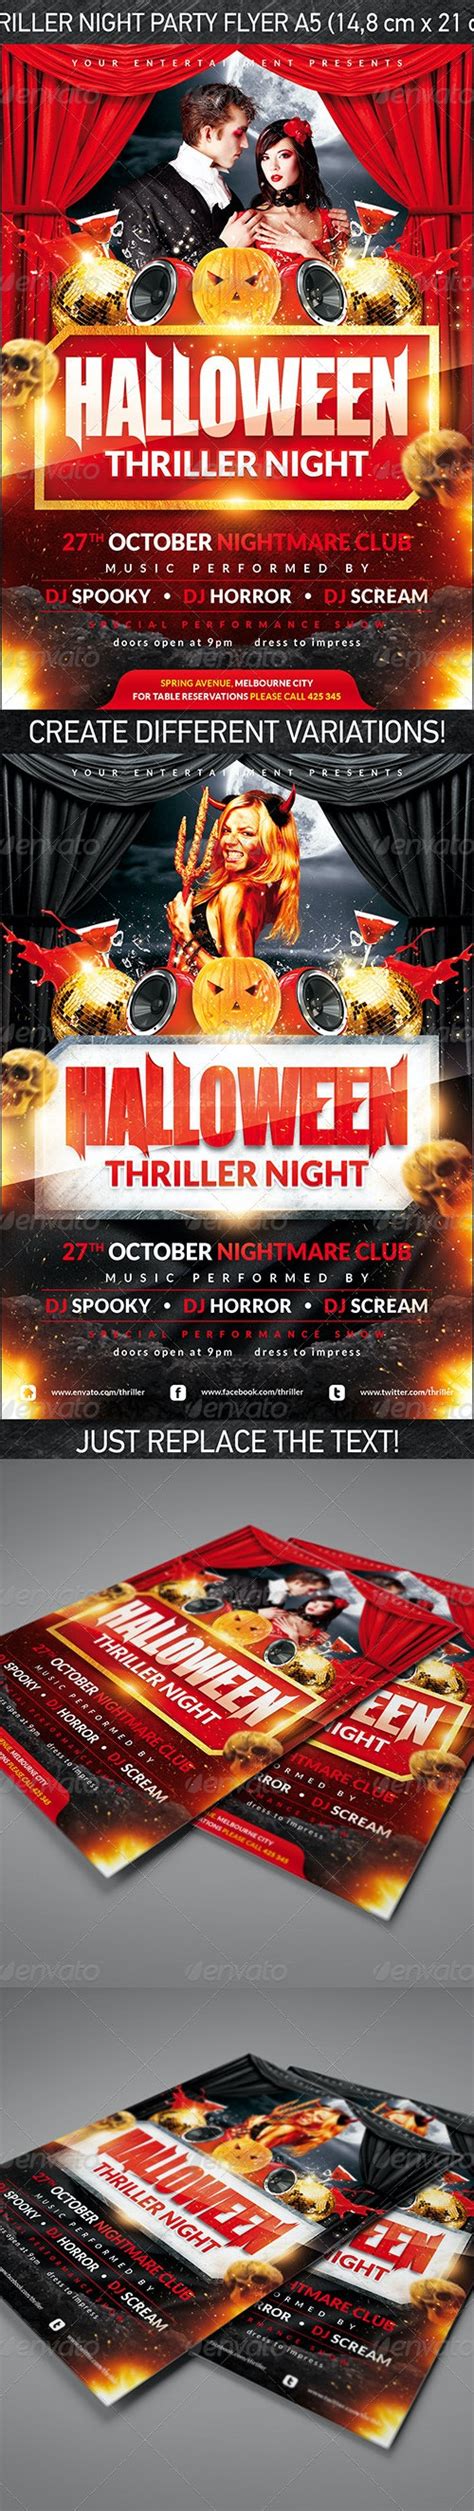 Halloween Thriller Night Party Flyer Print Templates Graphicriver